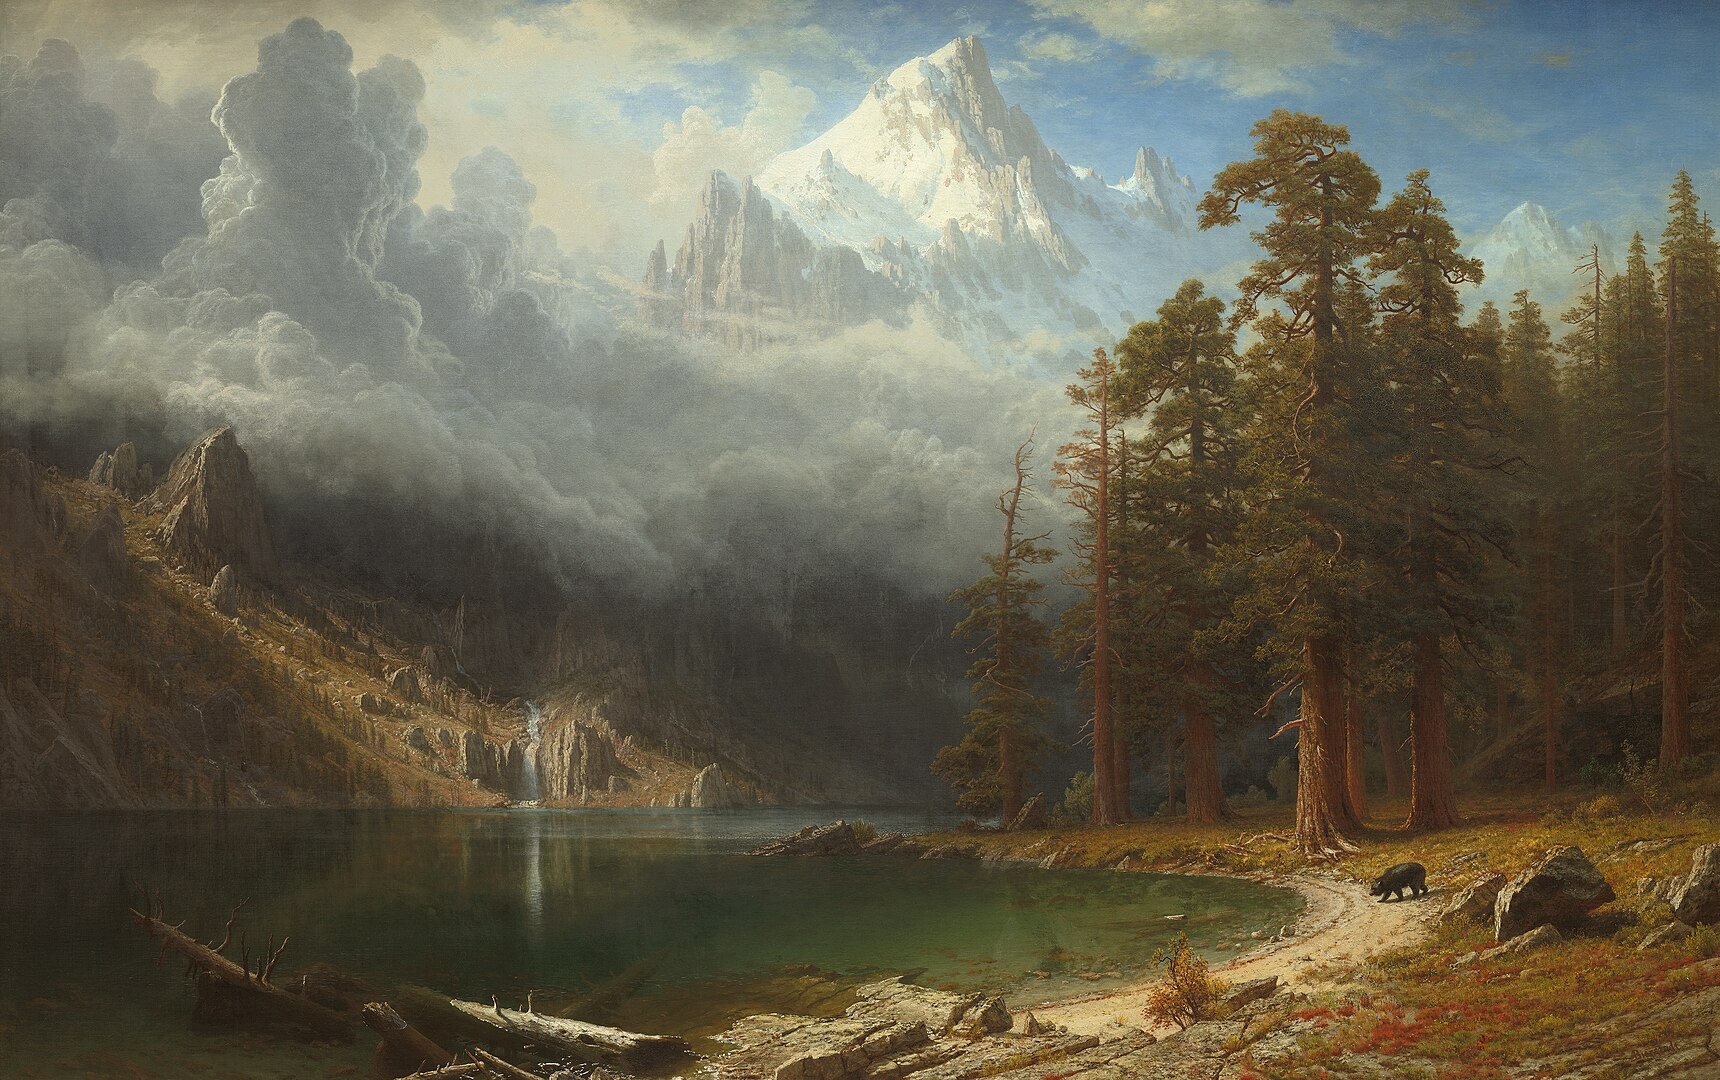 A natural landscape with a forest, mountain, and lake